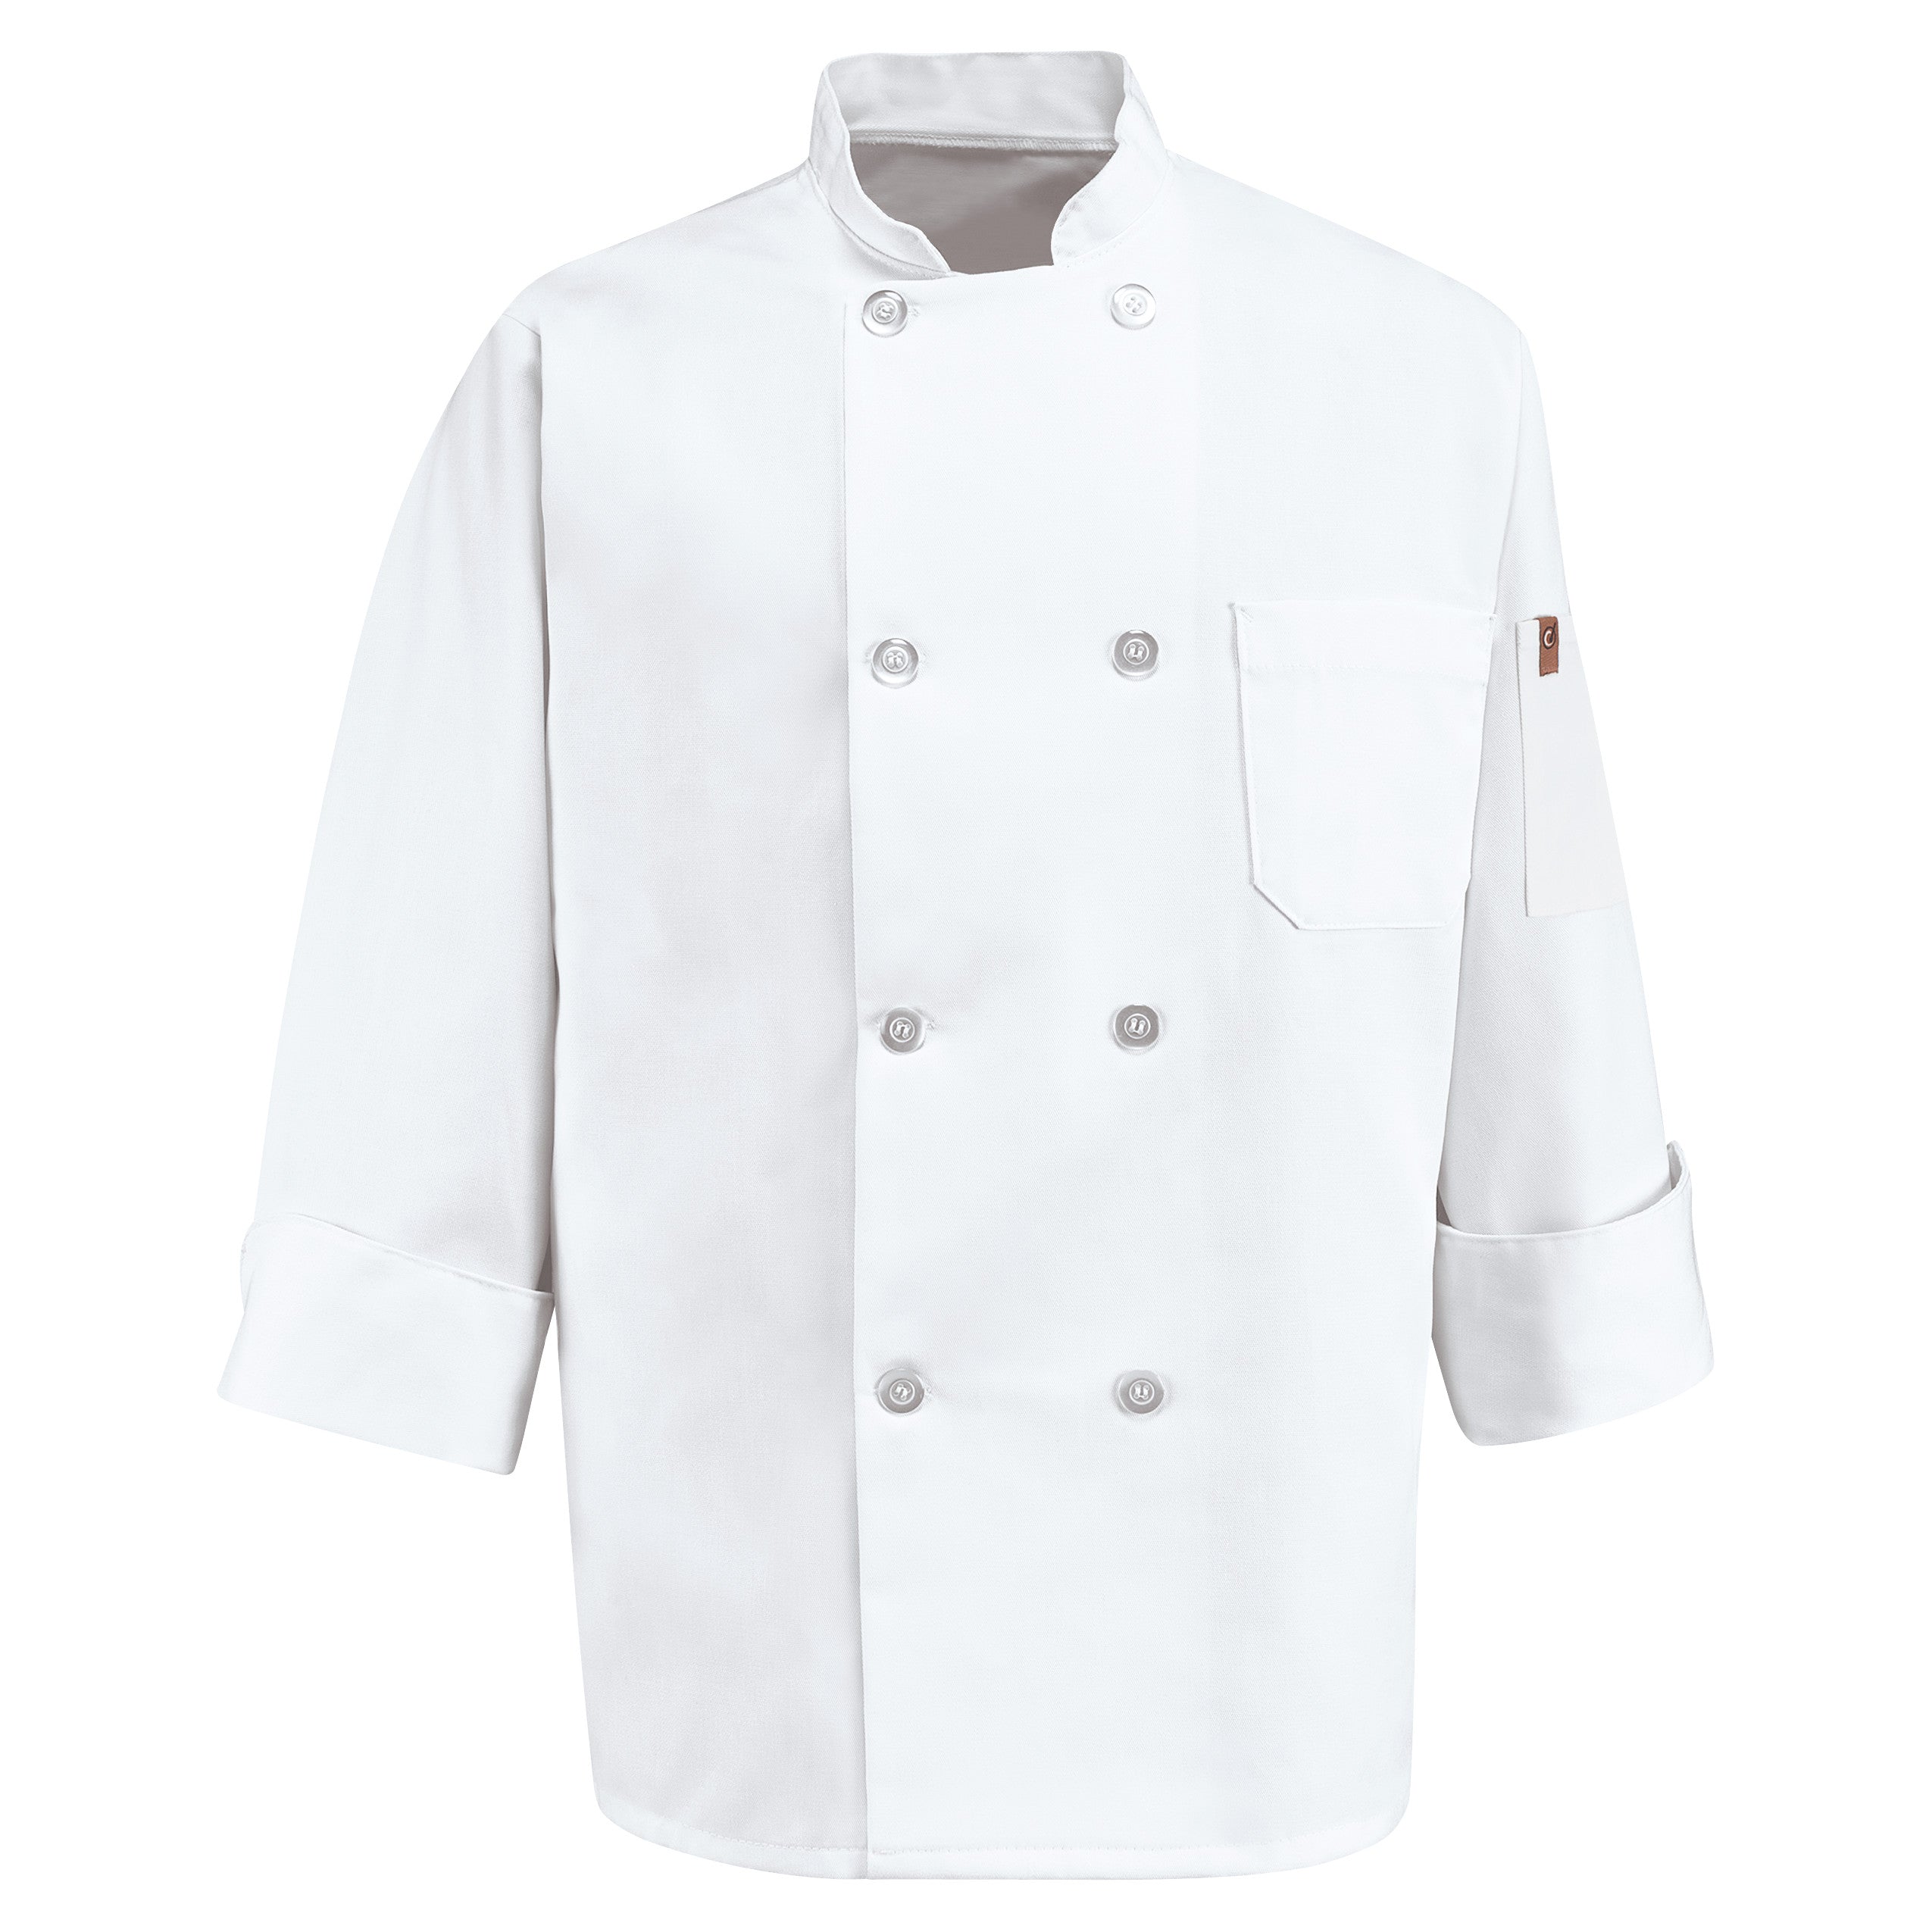 Eight Pearl Button Chef Coat with Thermometer Pocket 0413 - White